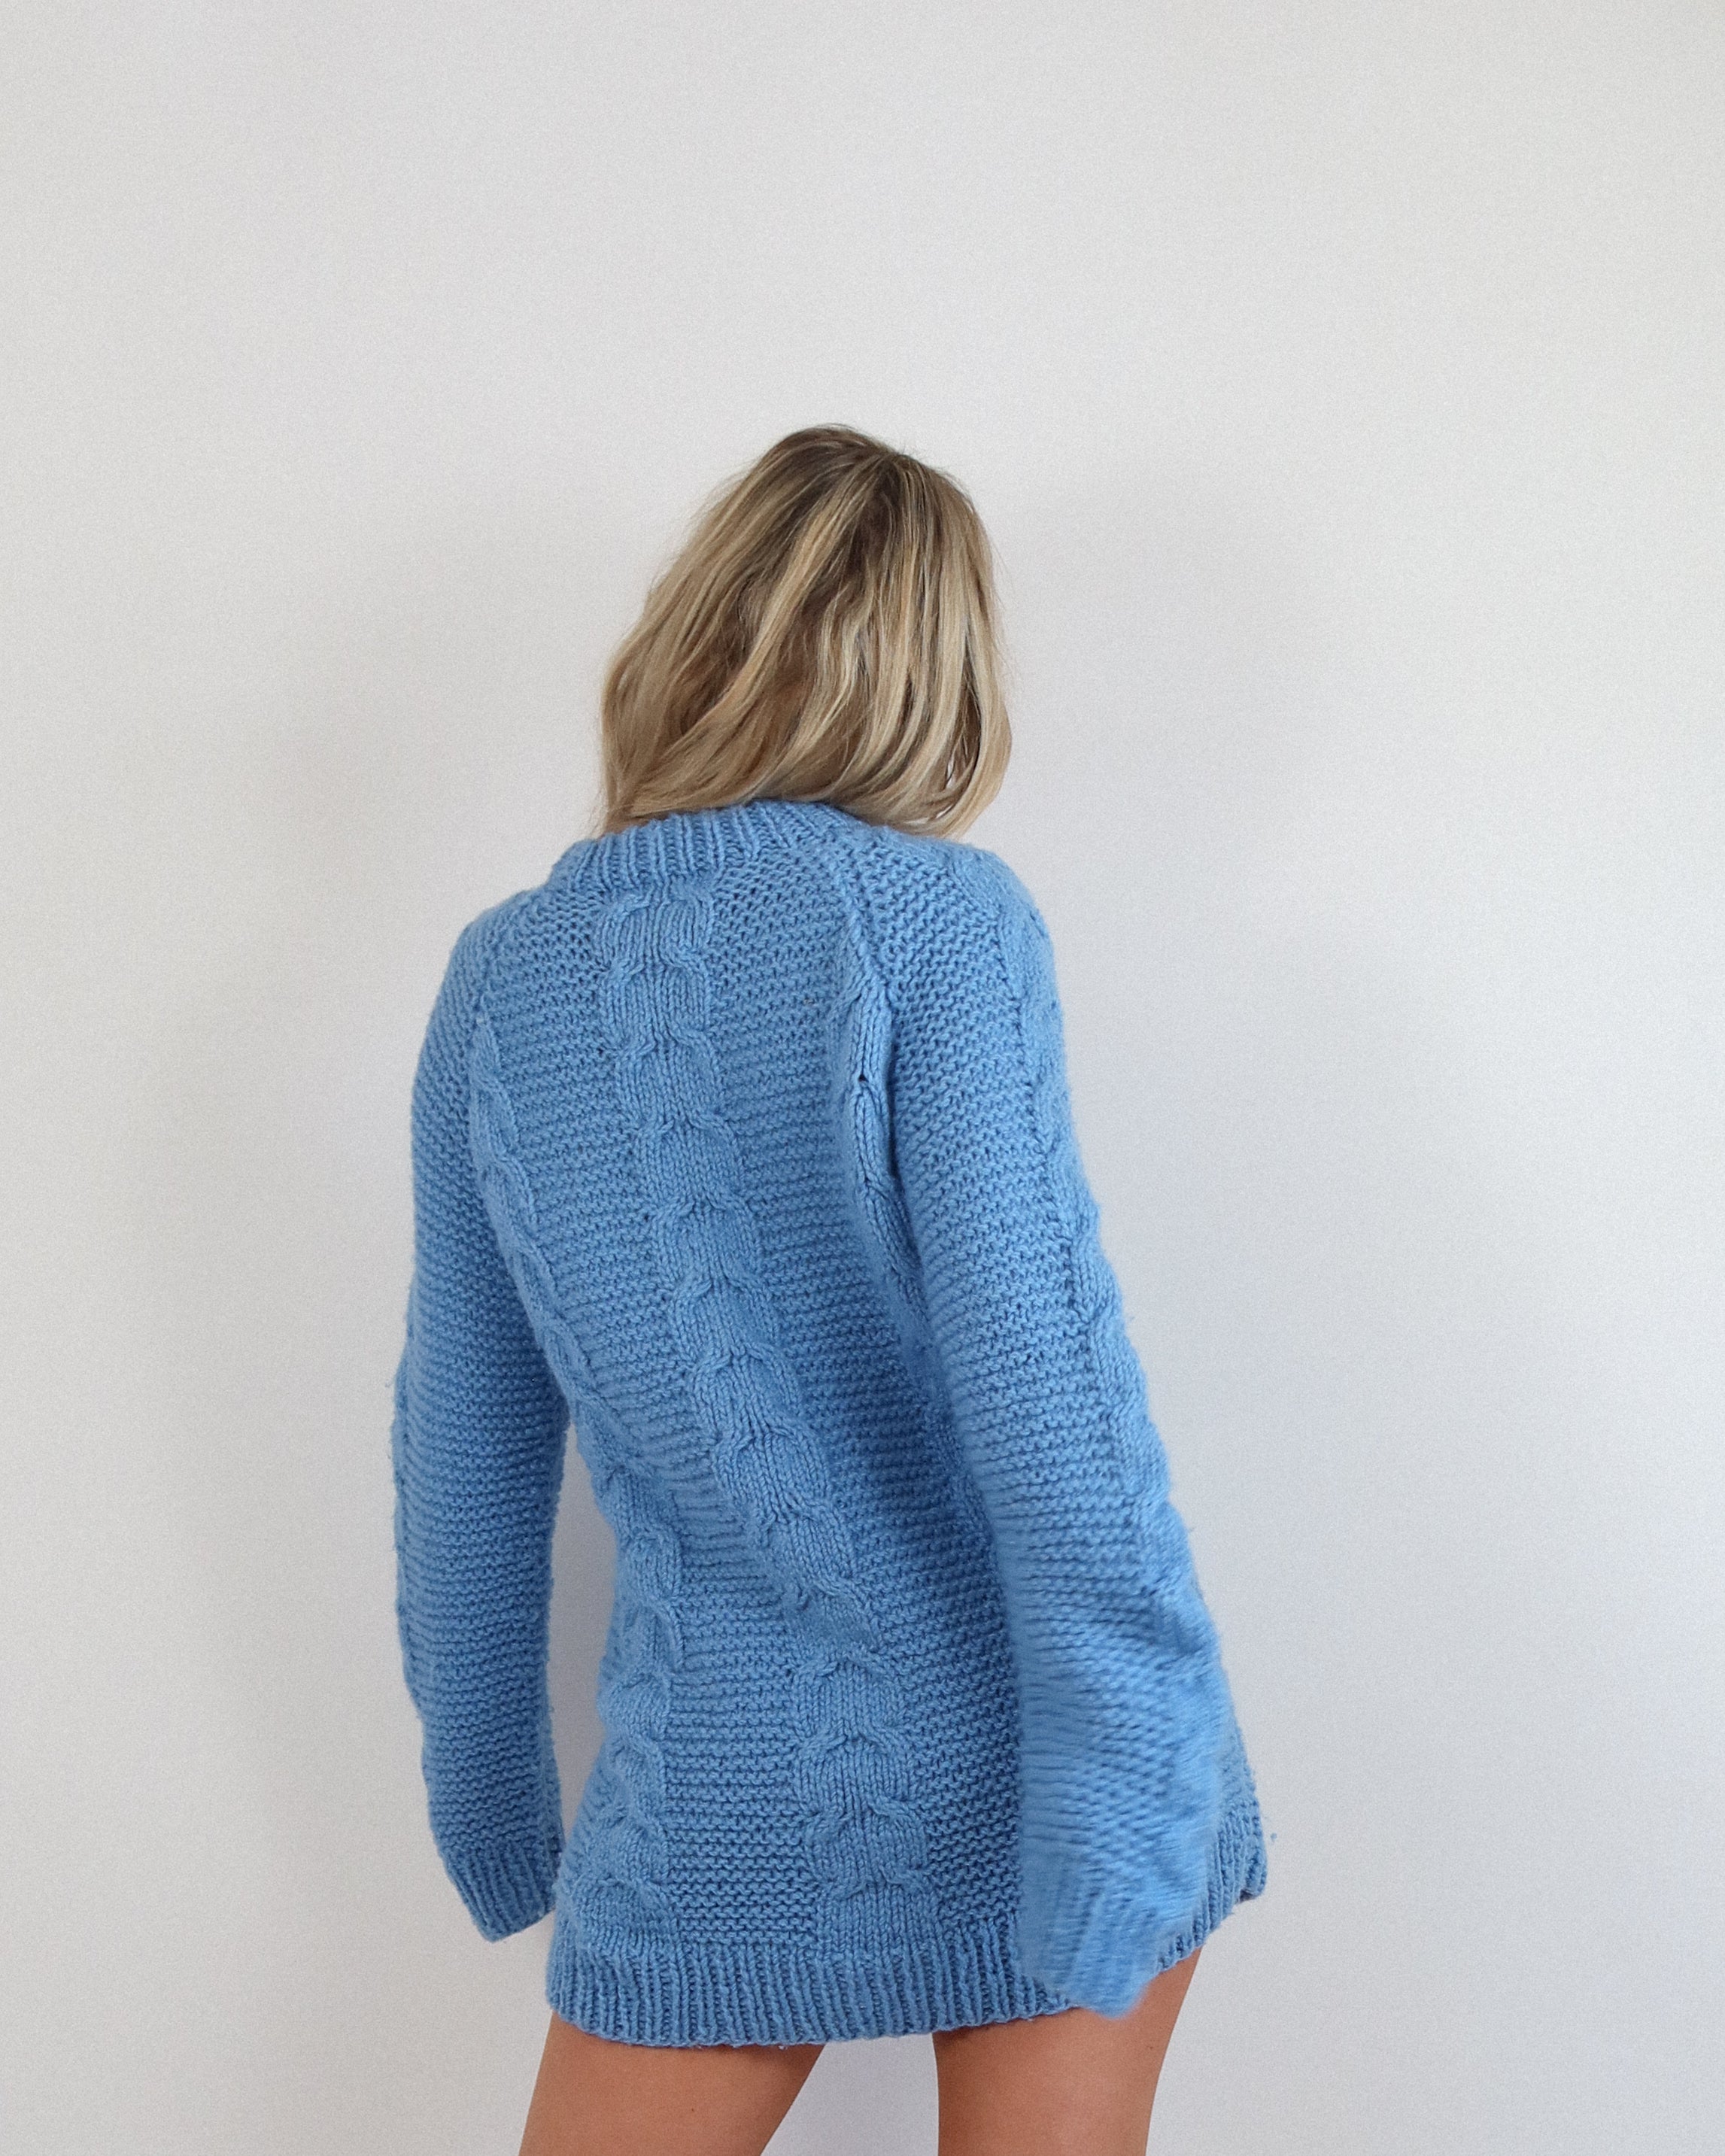 Vintage Hand Knit Oversized Sweater